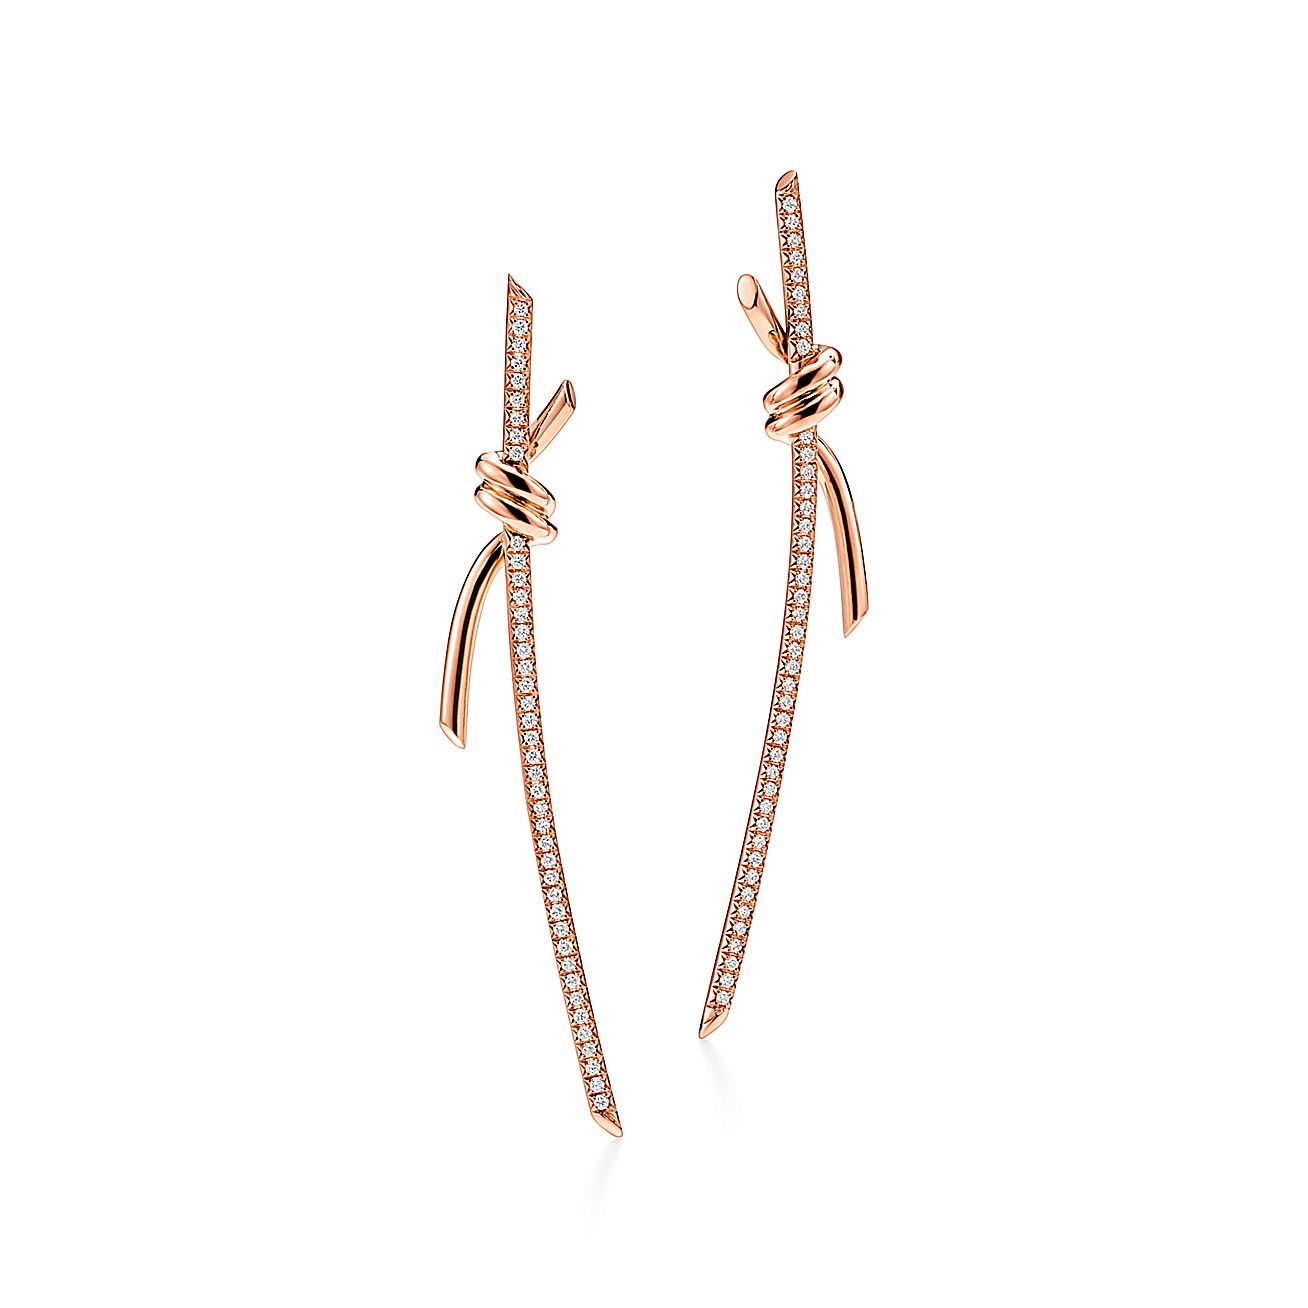 Tiffany KnotDrop Earrings
in Rose Gold with Diamonds